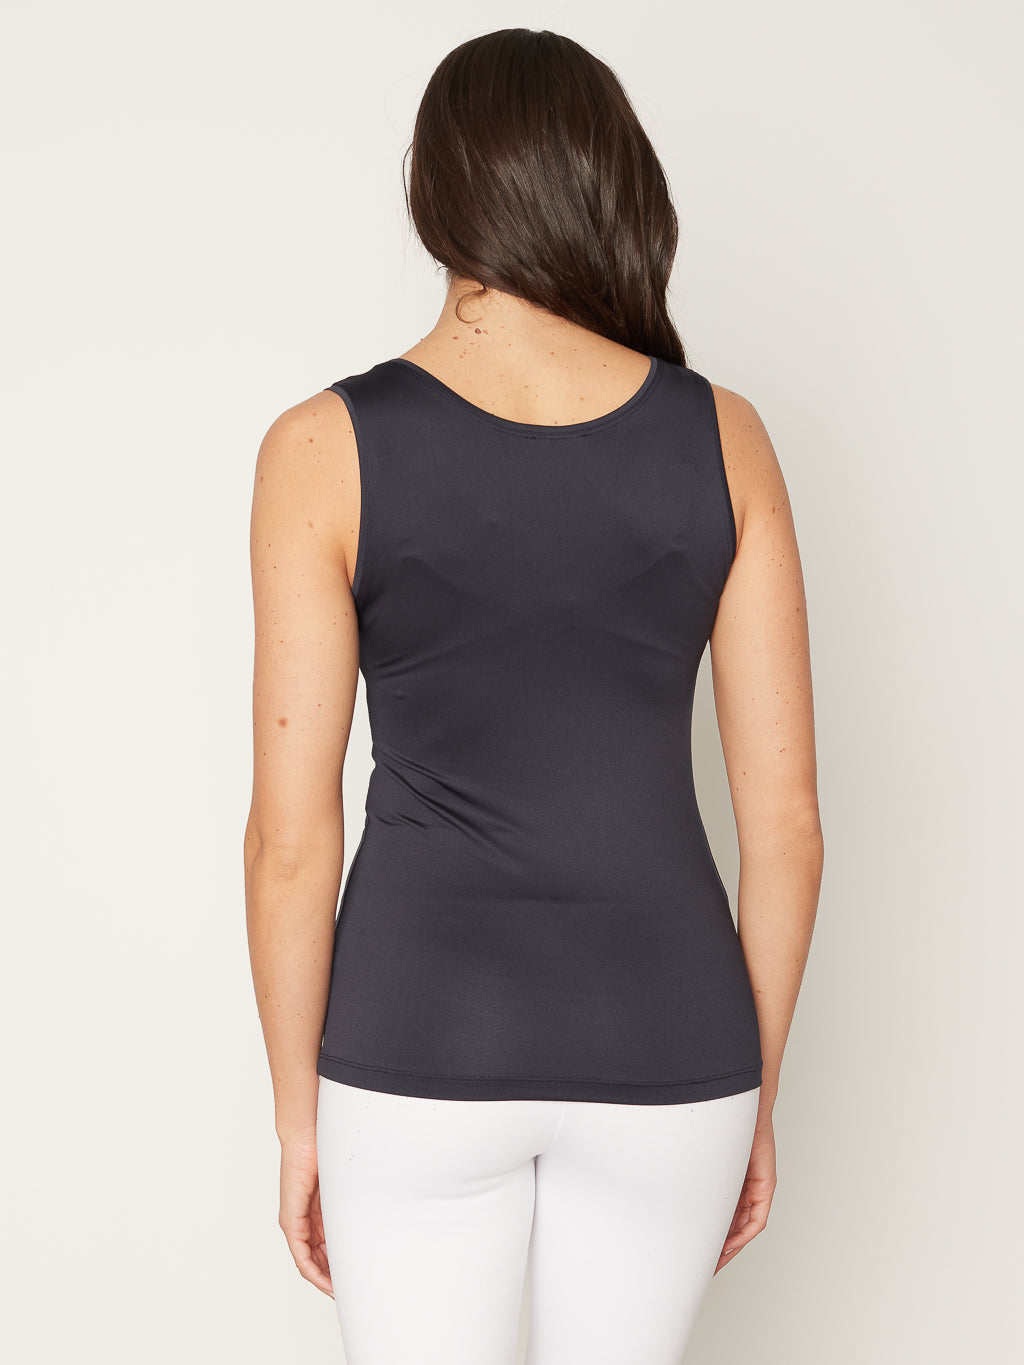 Semi-fitted tank top